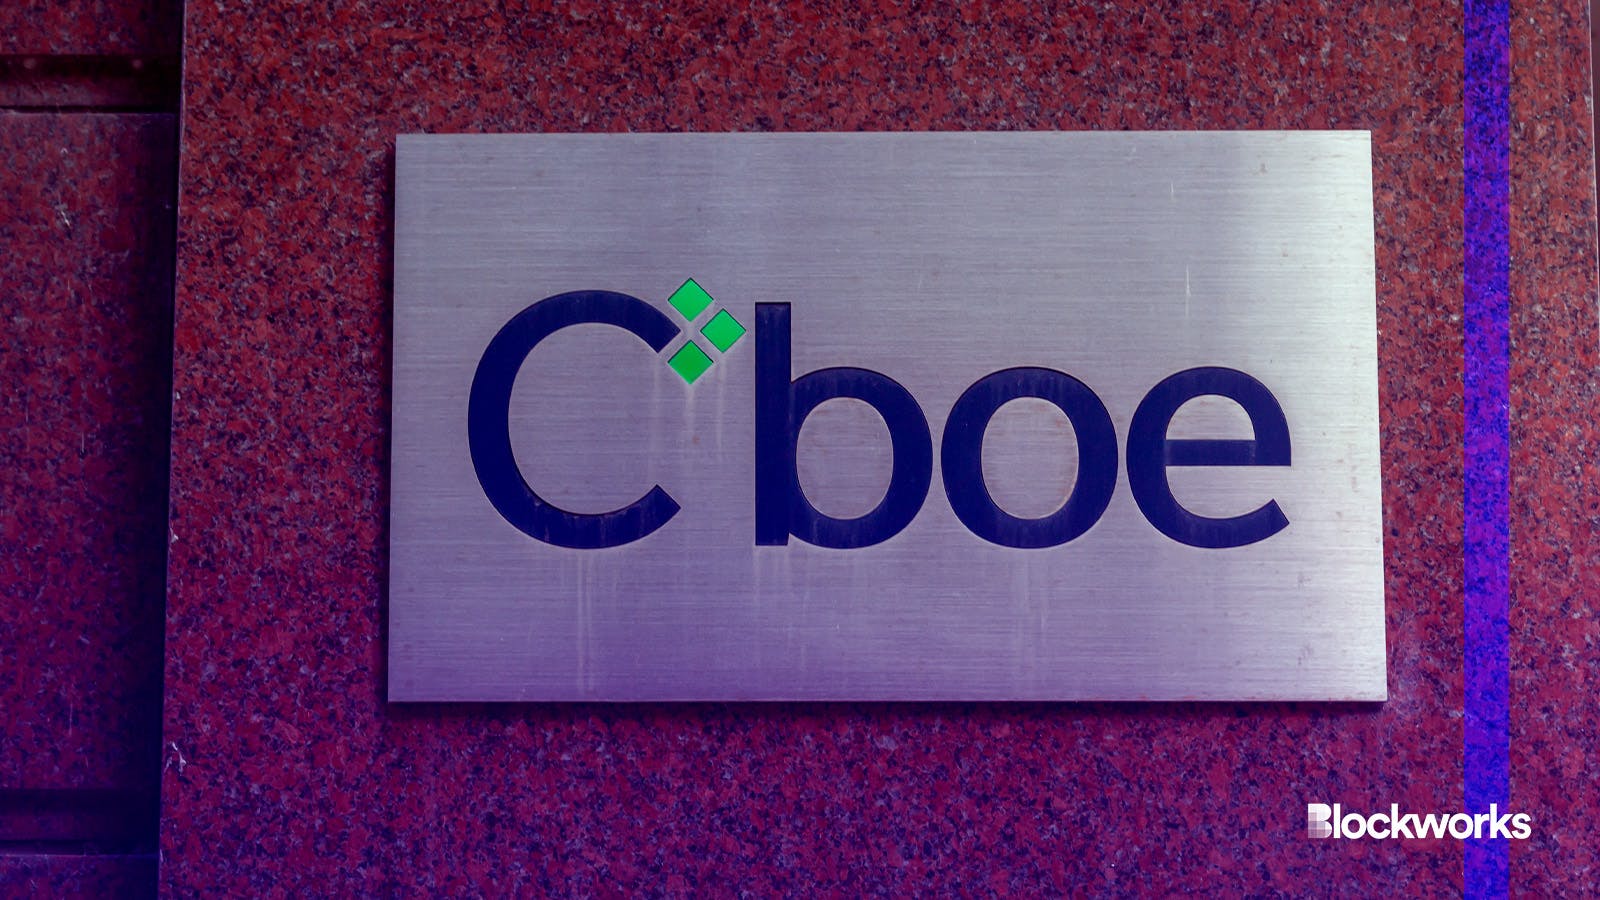 CBOE Digital president says a spot bitcoin ETF approval will promote derivatives growth